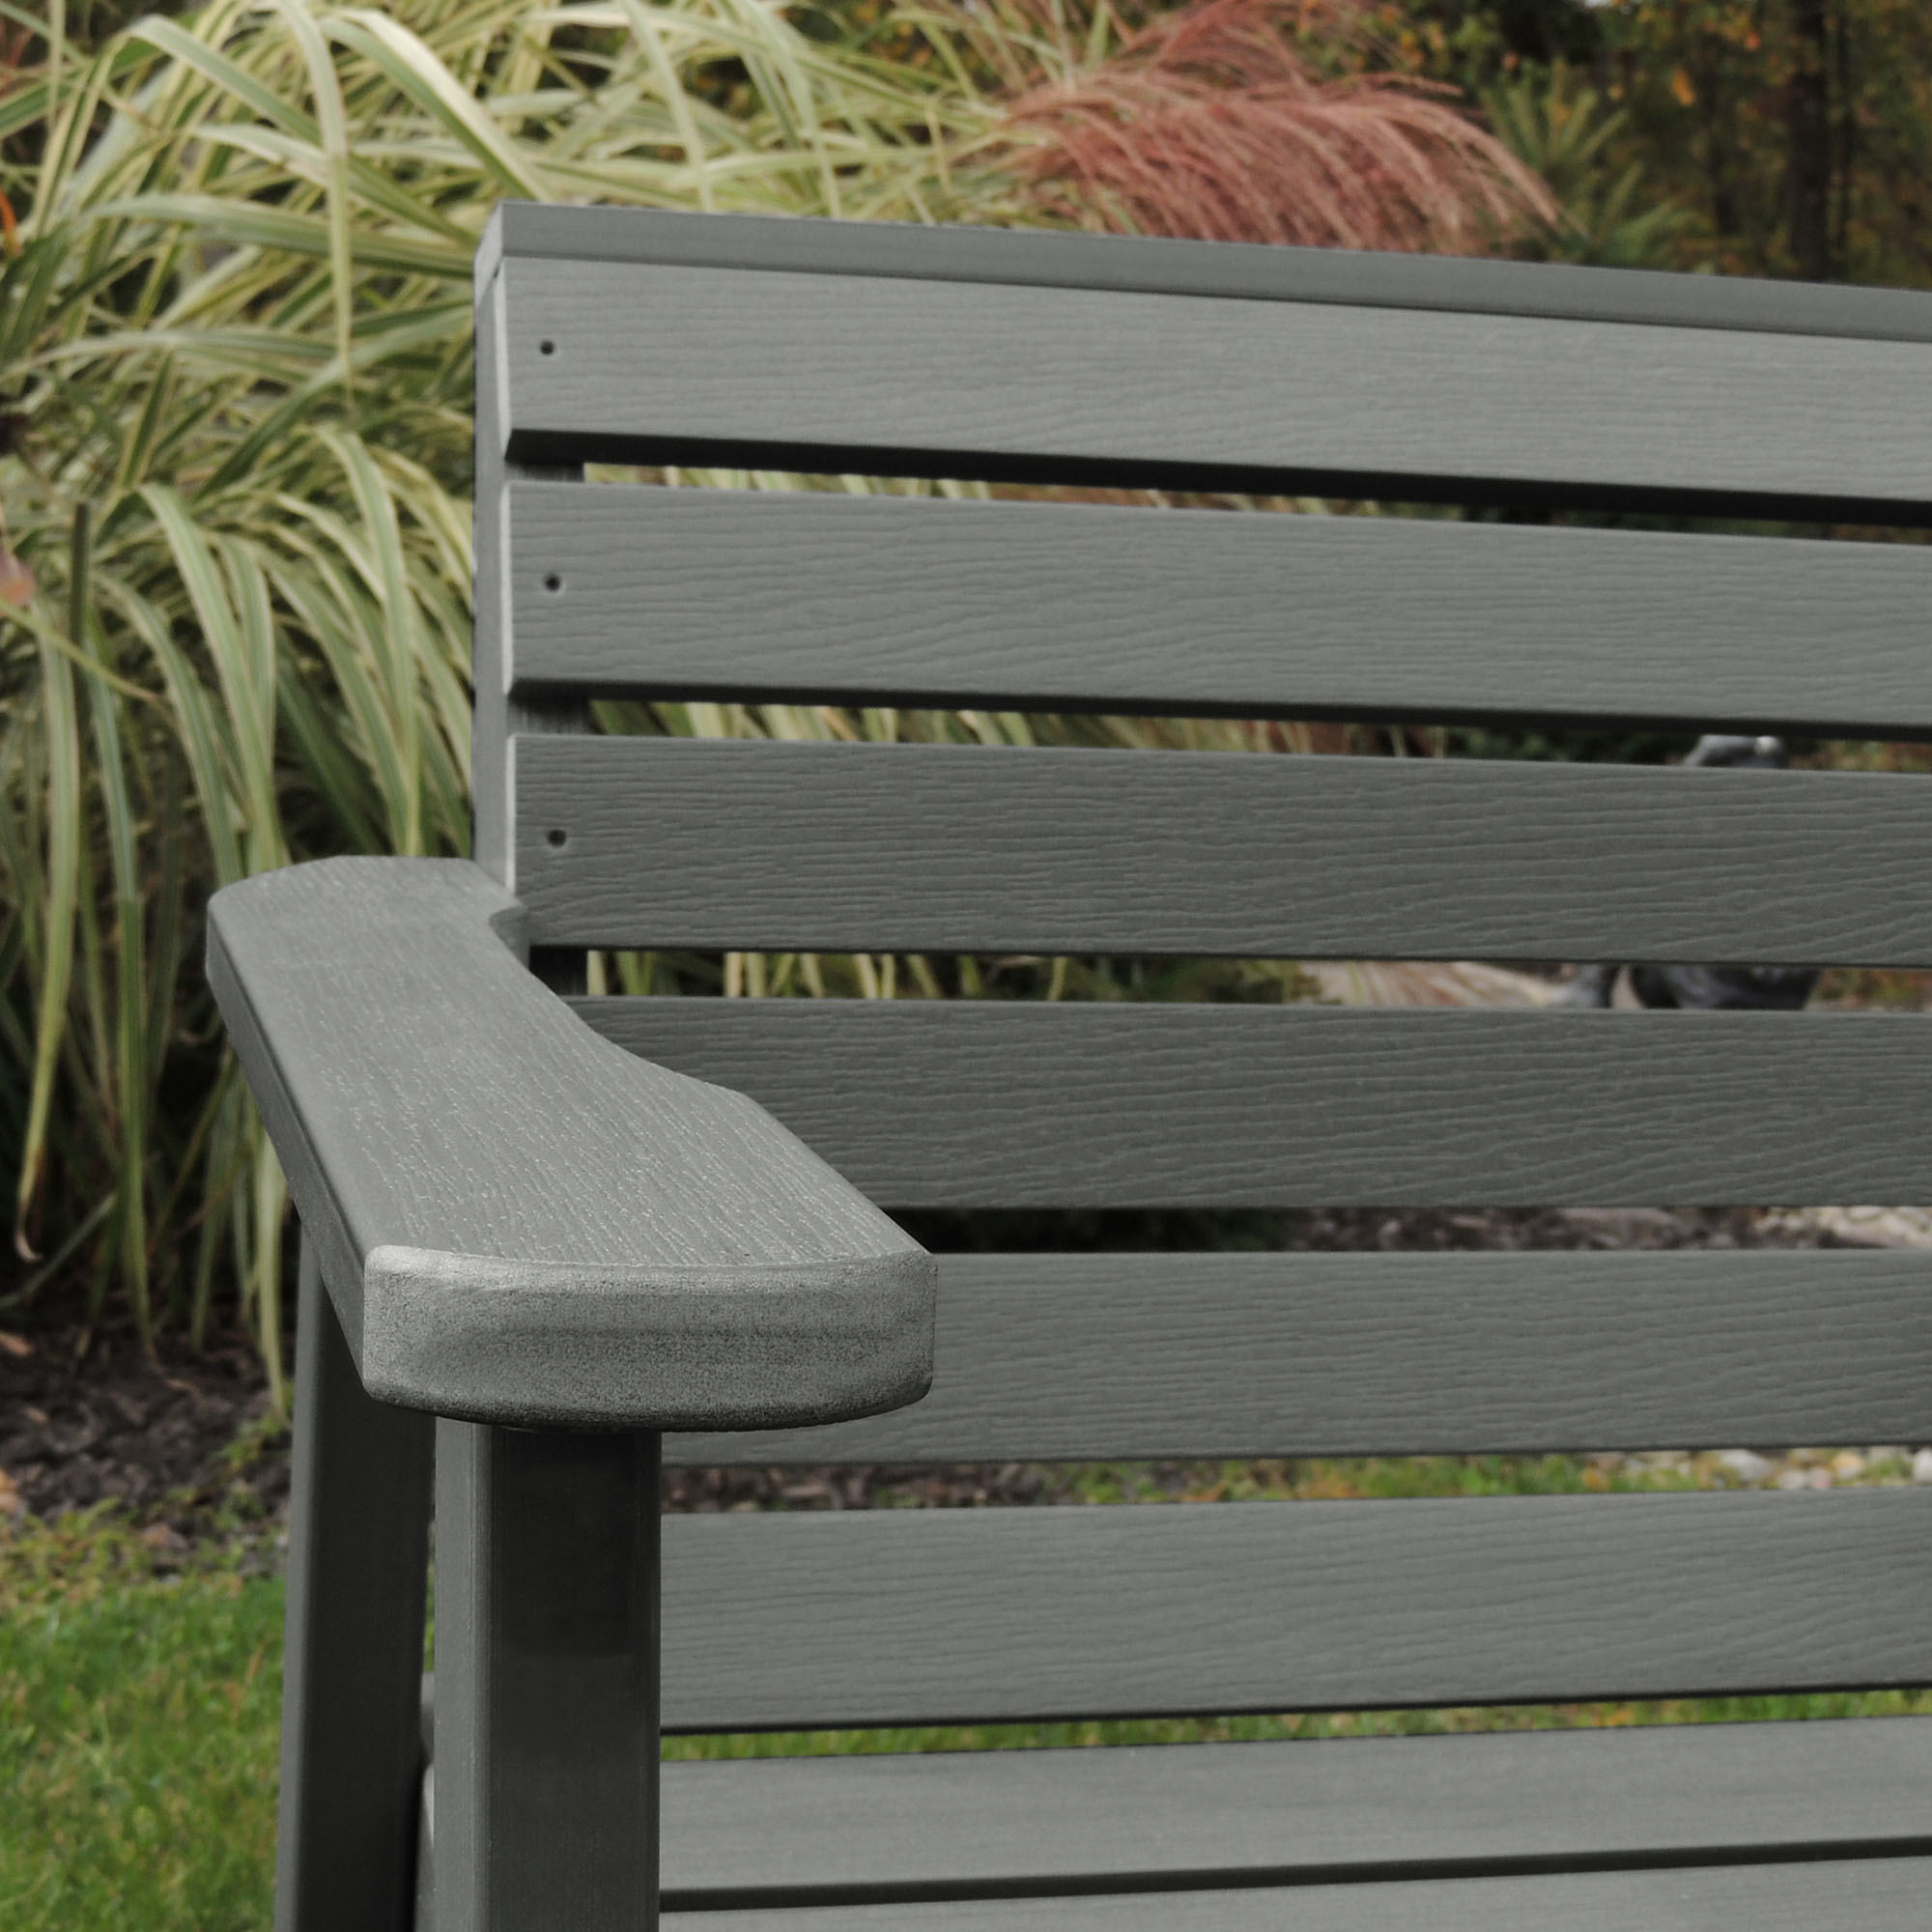 Highwood Weatherly Garden Chair - image 5 of 5